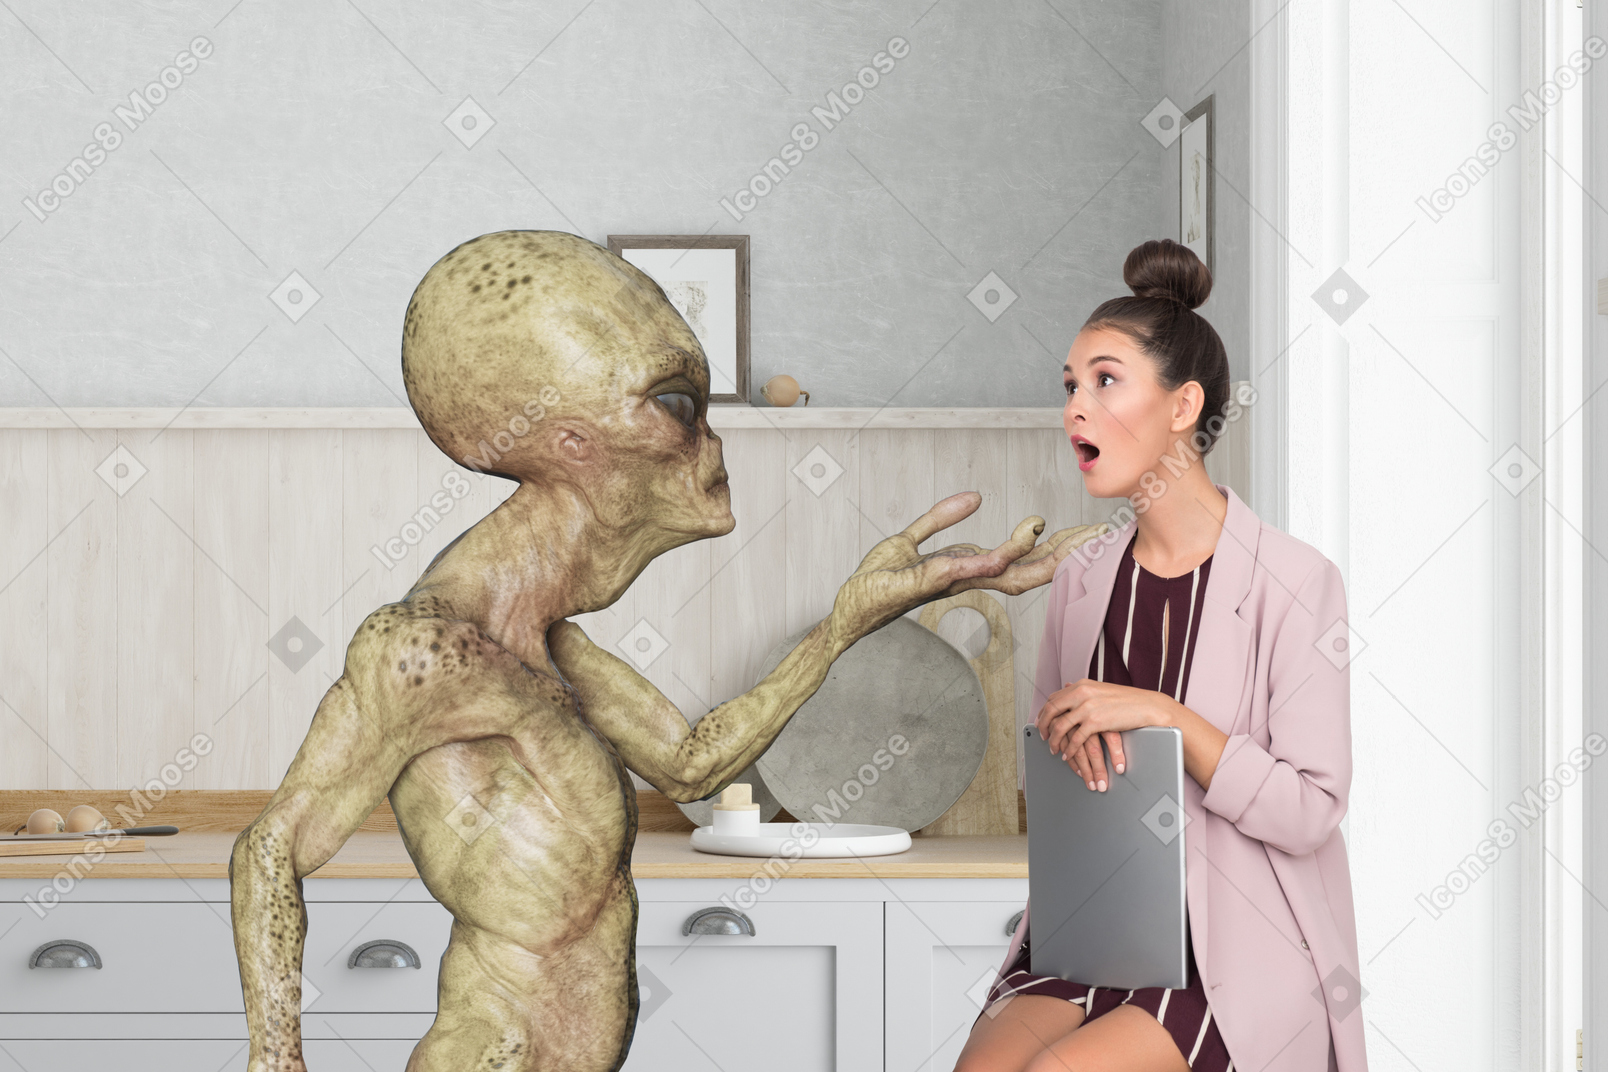 Shocked woman sitting next to an alien in a kitchen